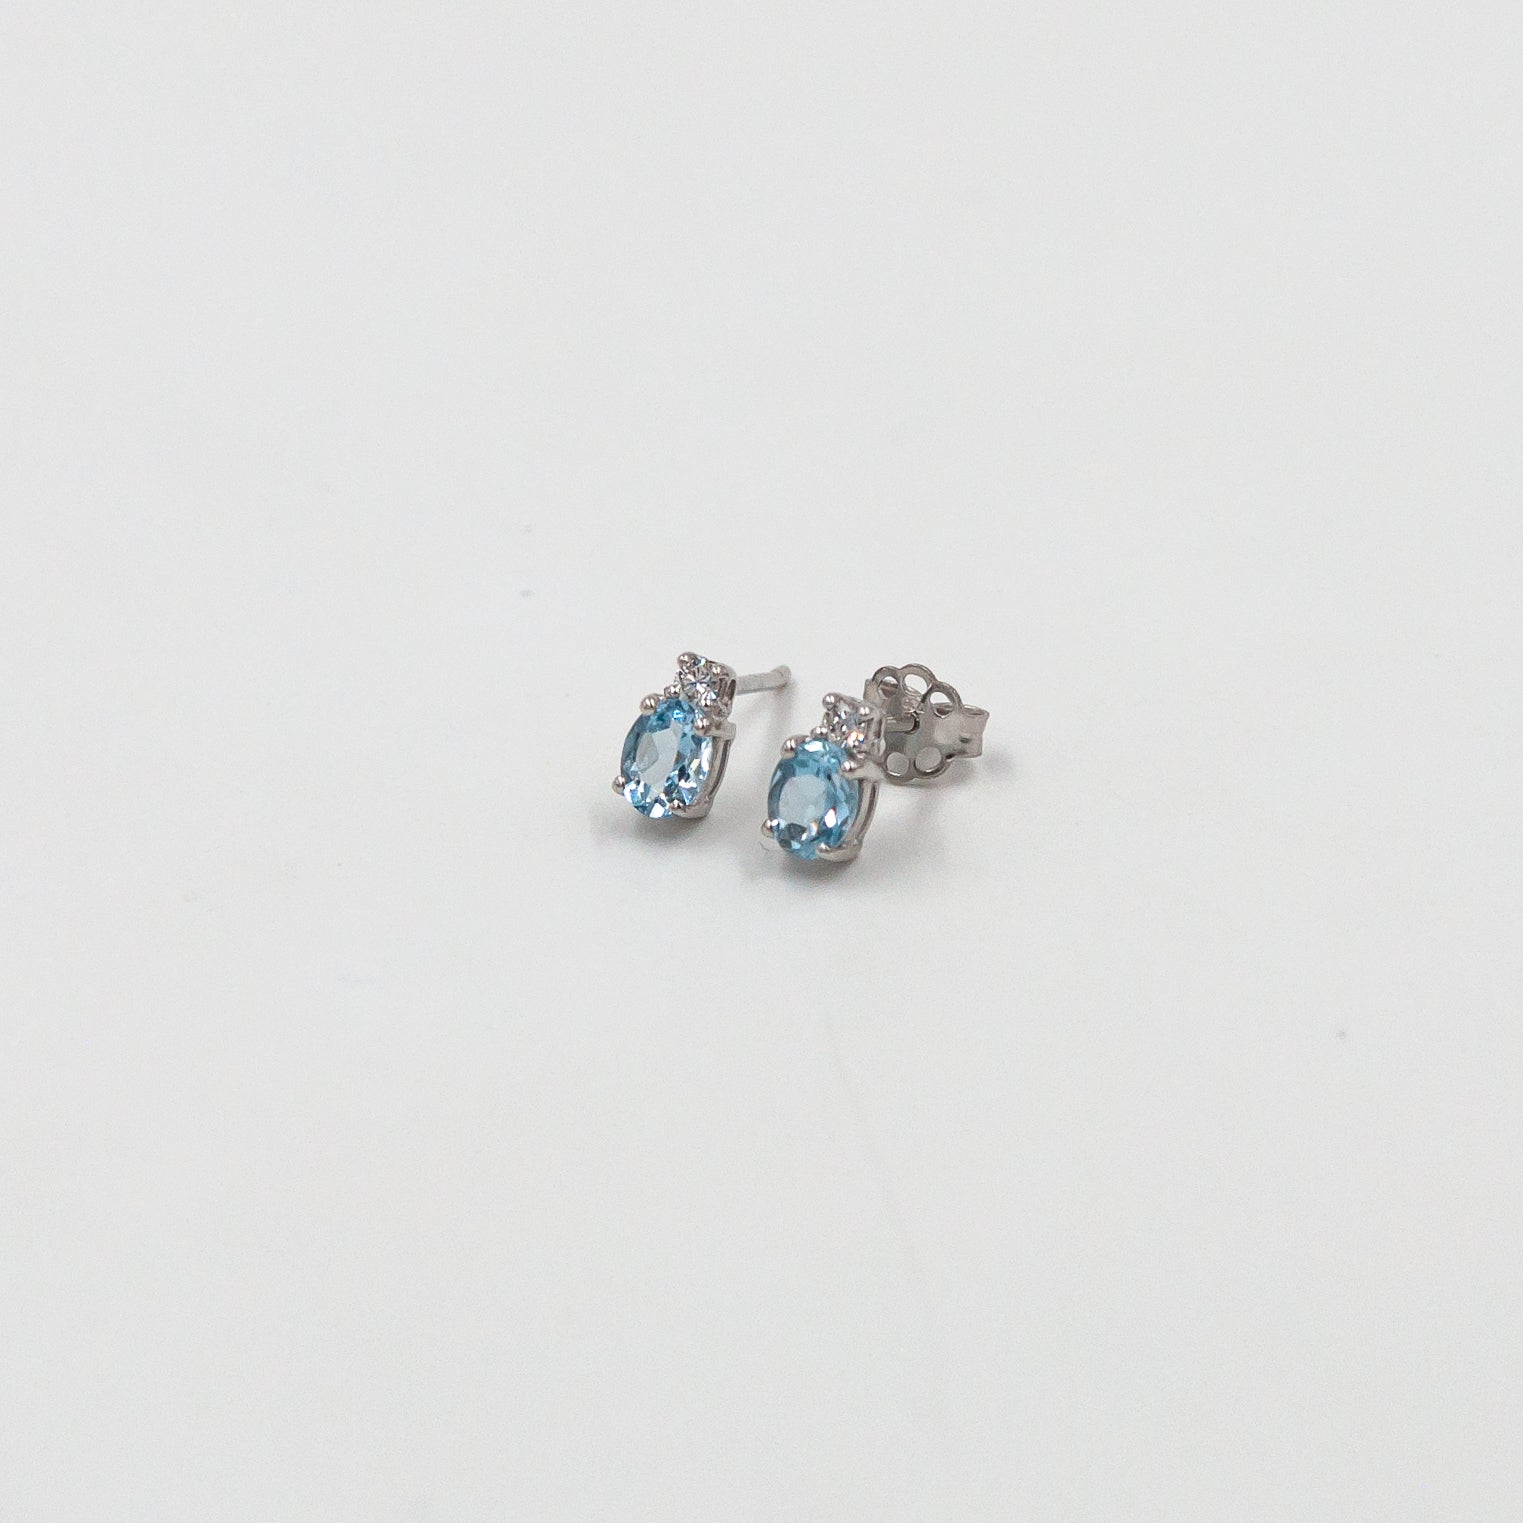 Droplets earrings with Aquamarine and Diamonds